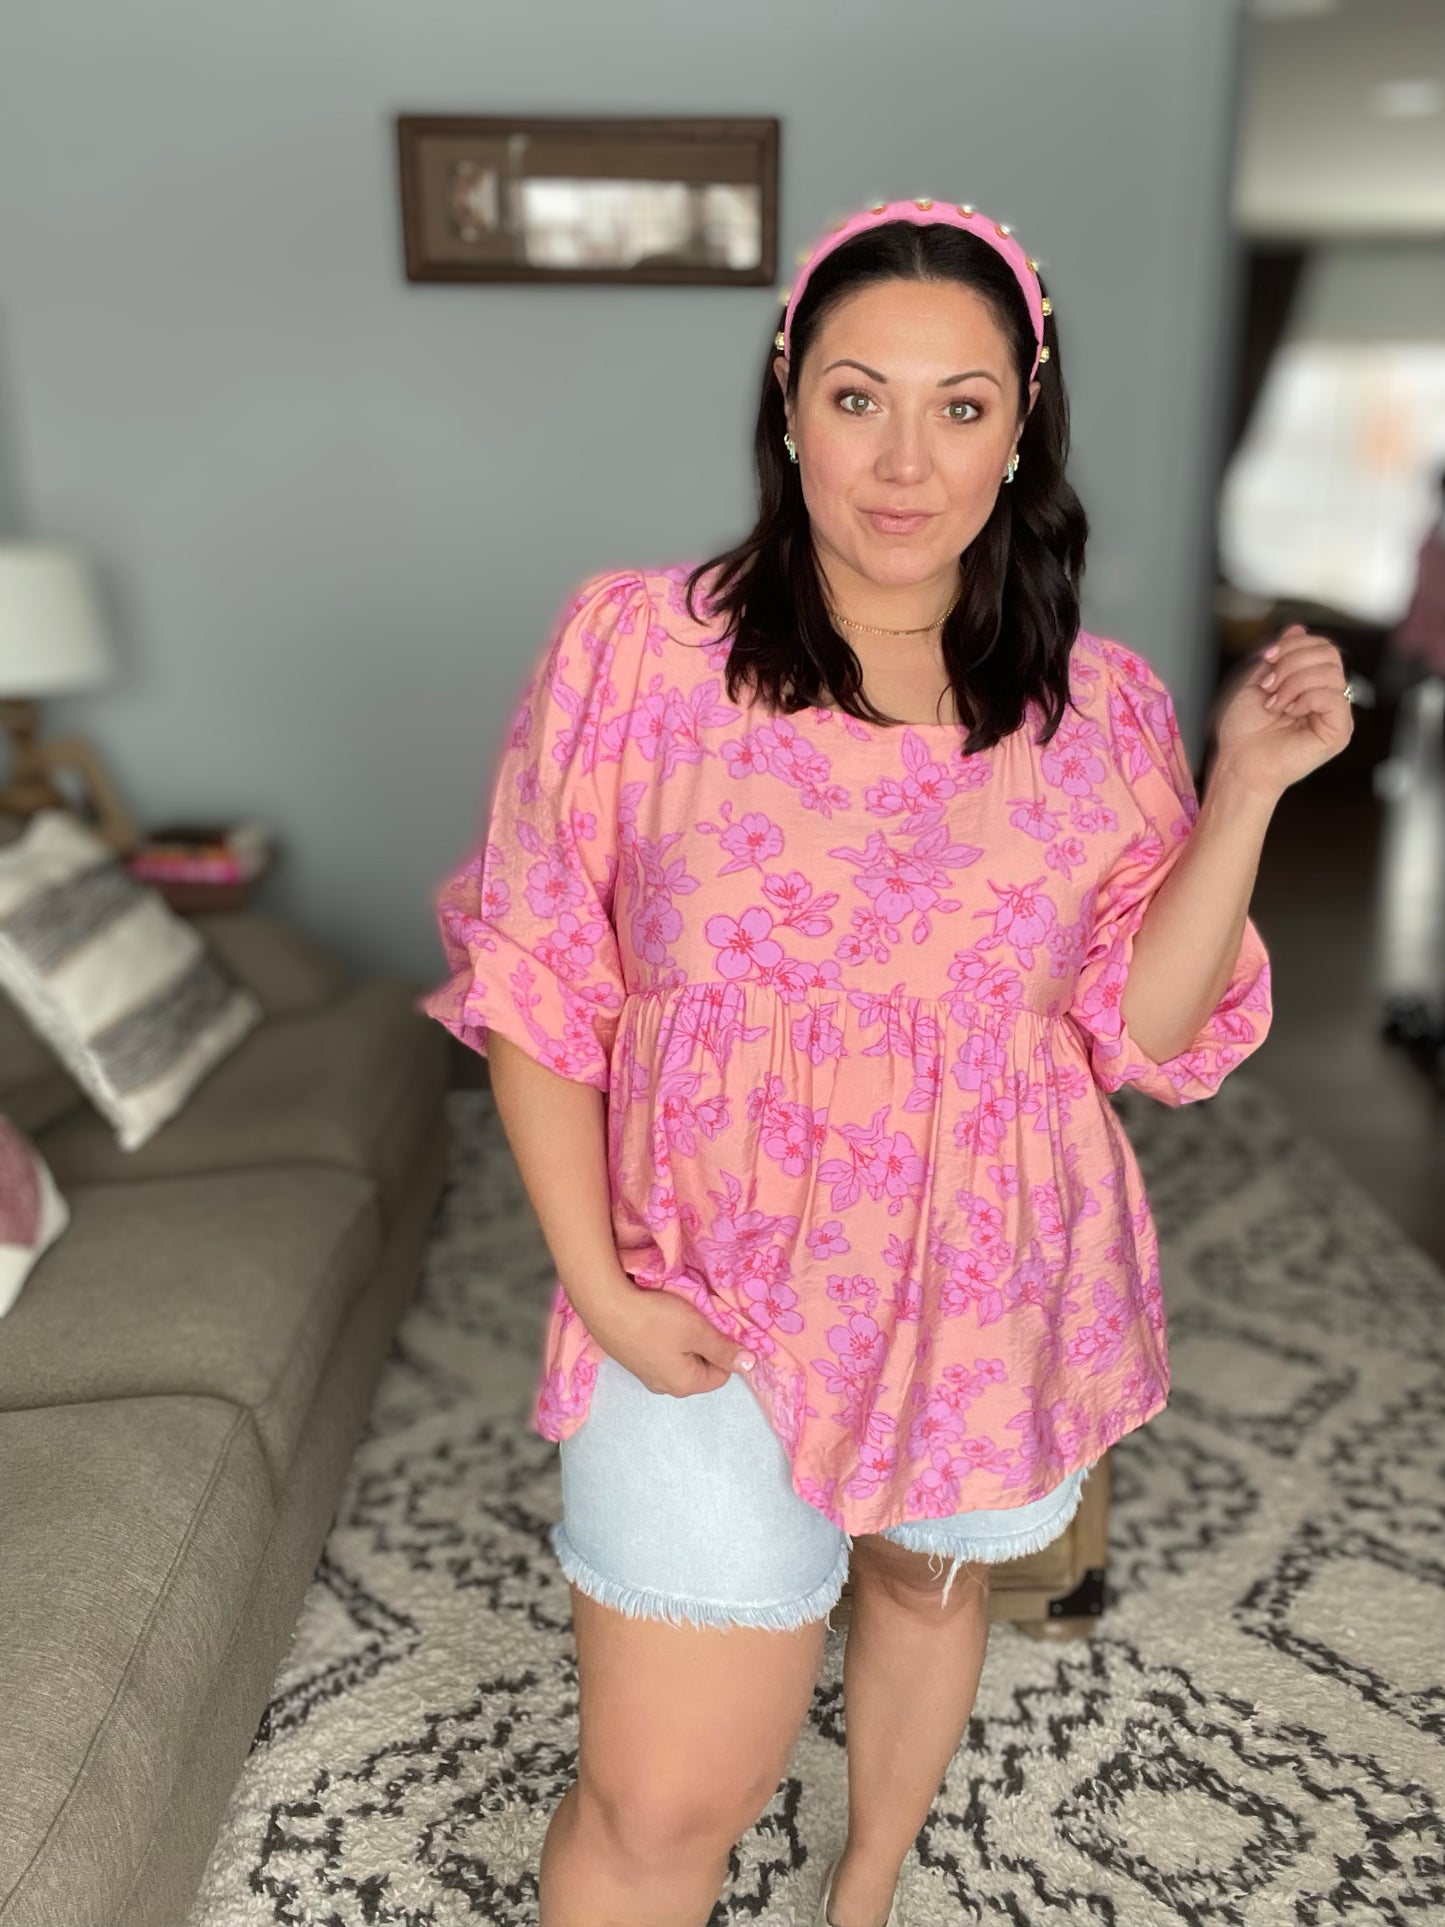 Making Moves Peach & Pink Floral Peplum Woven Top